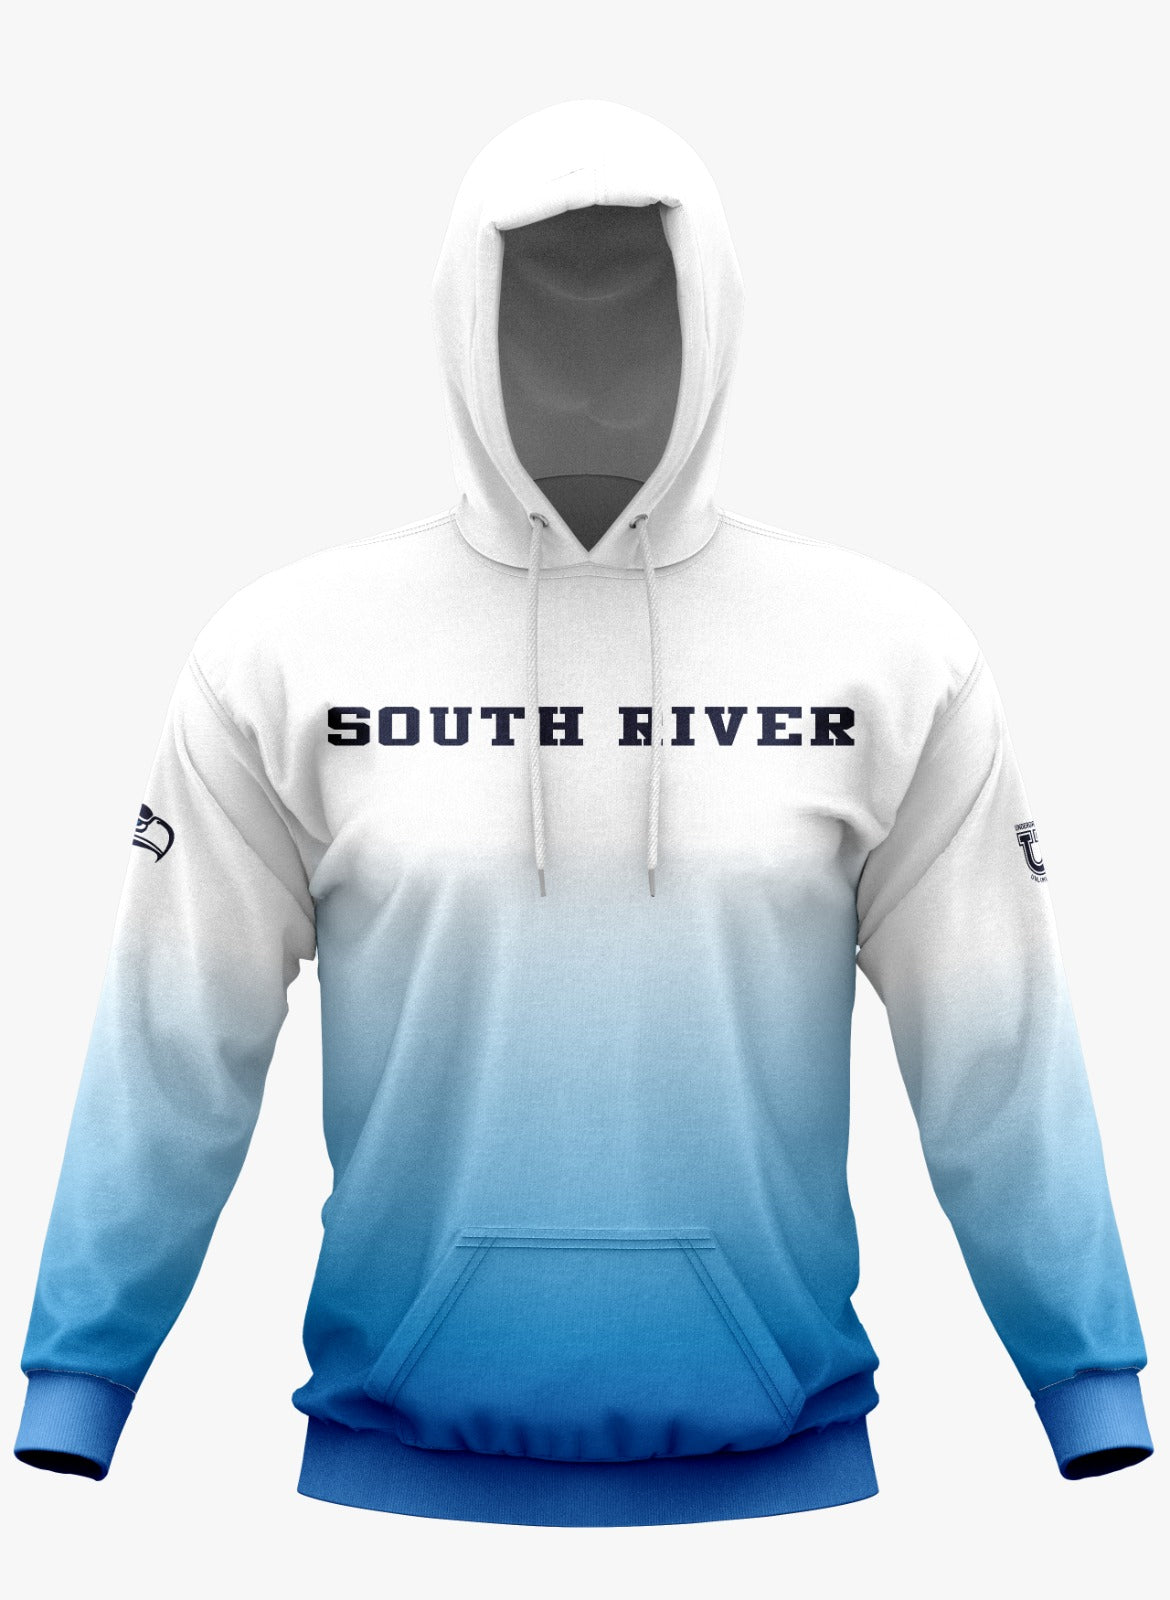 South River Performance Hoodie ~ White to Columbia Fade